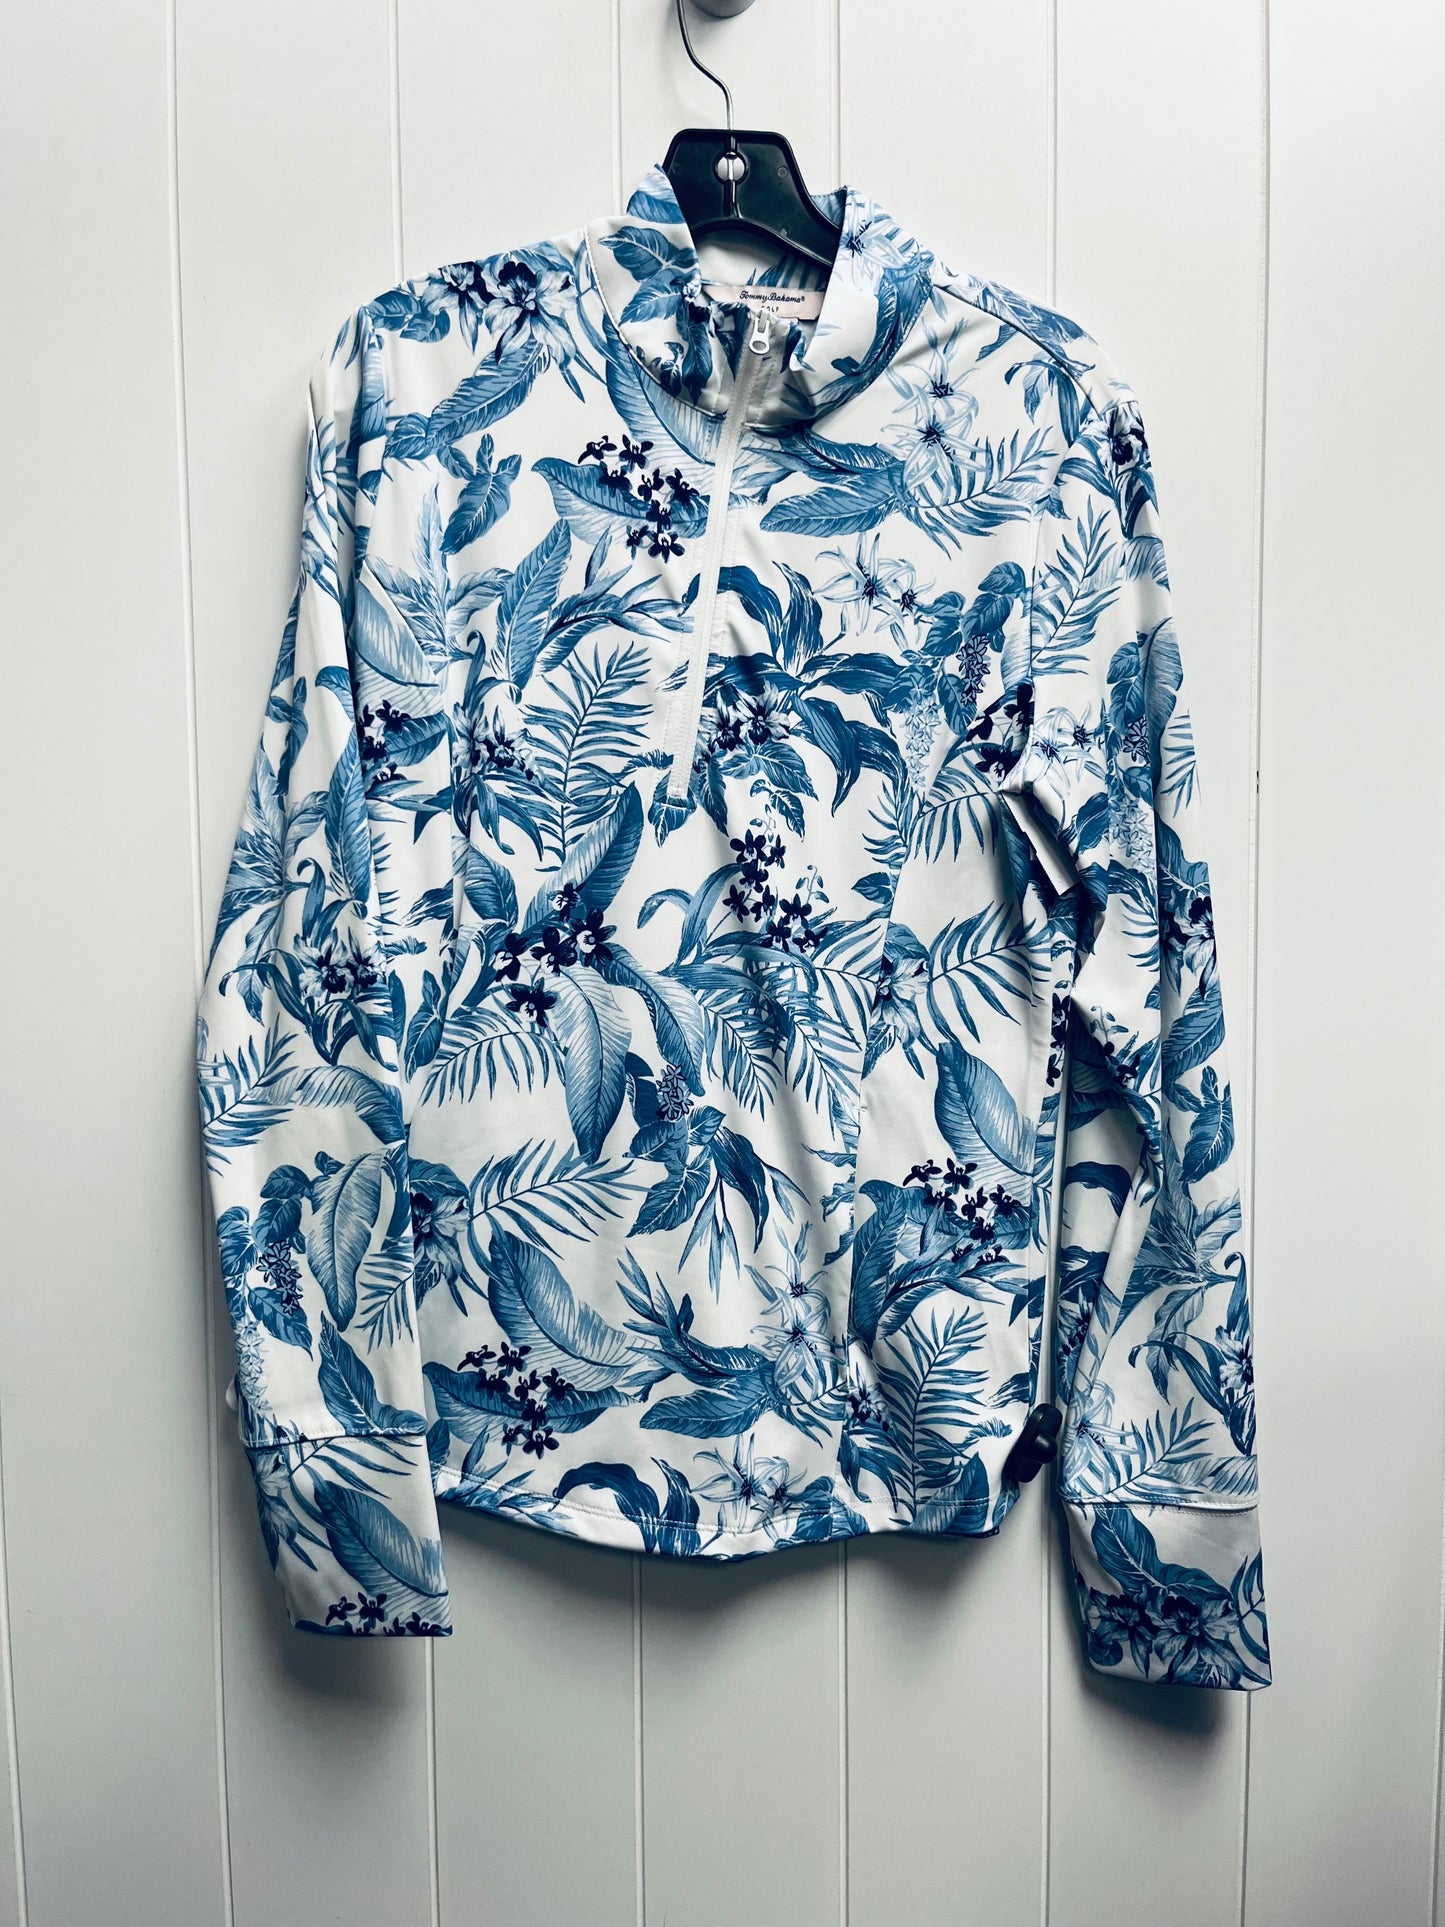 Blue & White Top Long Sleeve Tommy Bahama, Size M